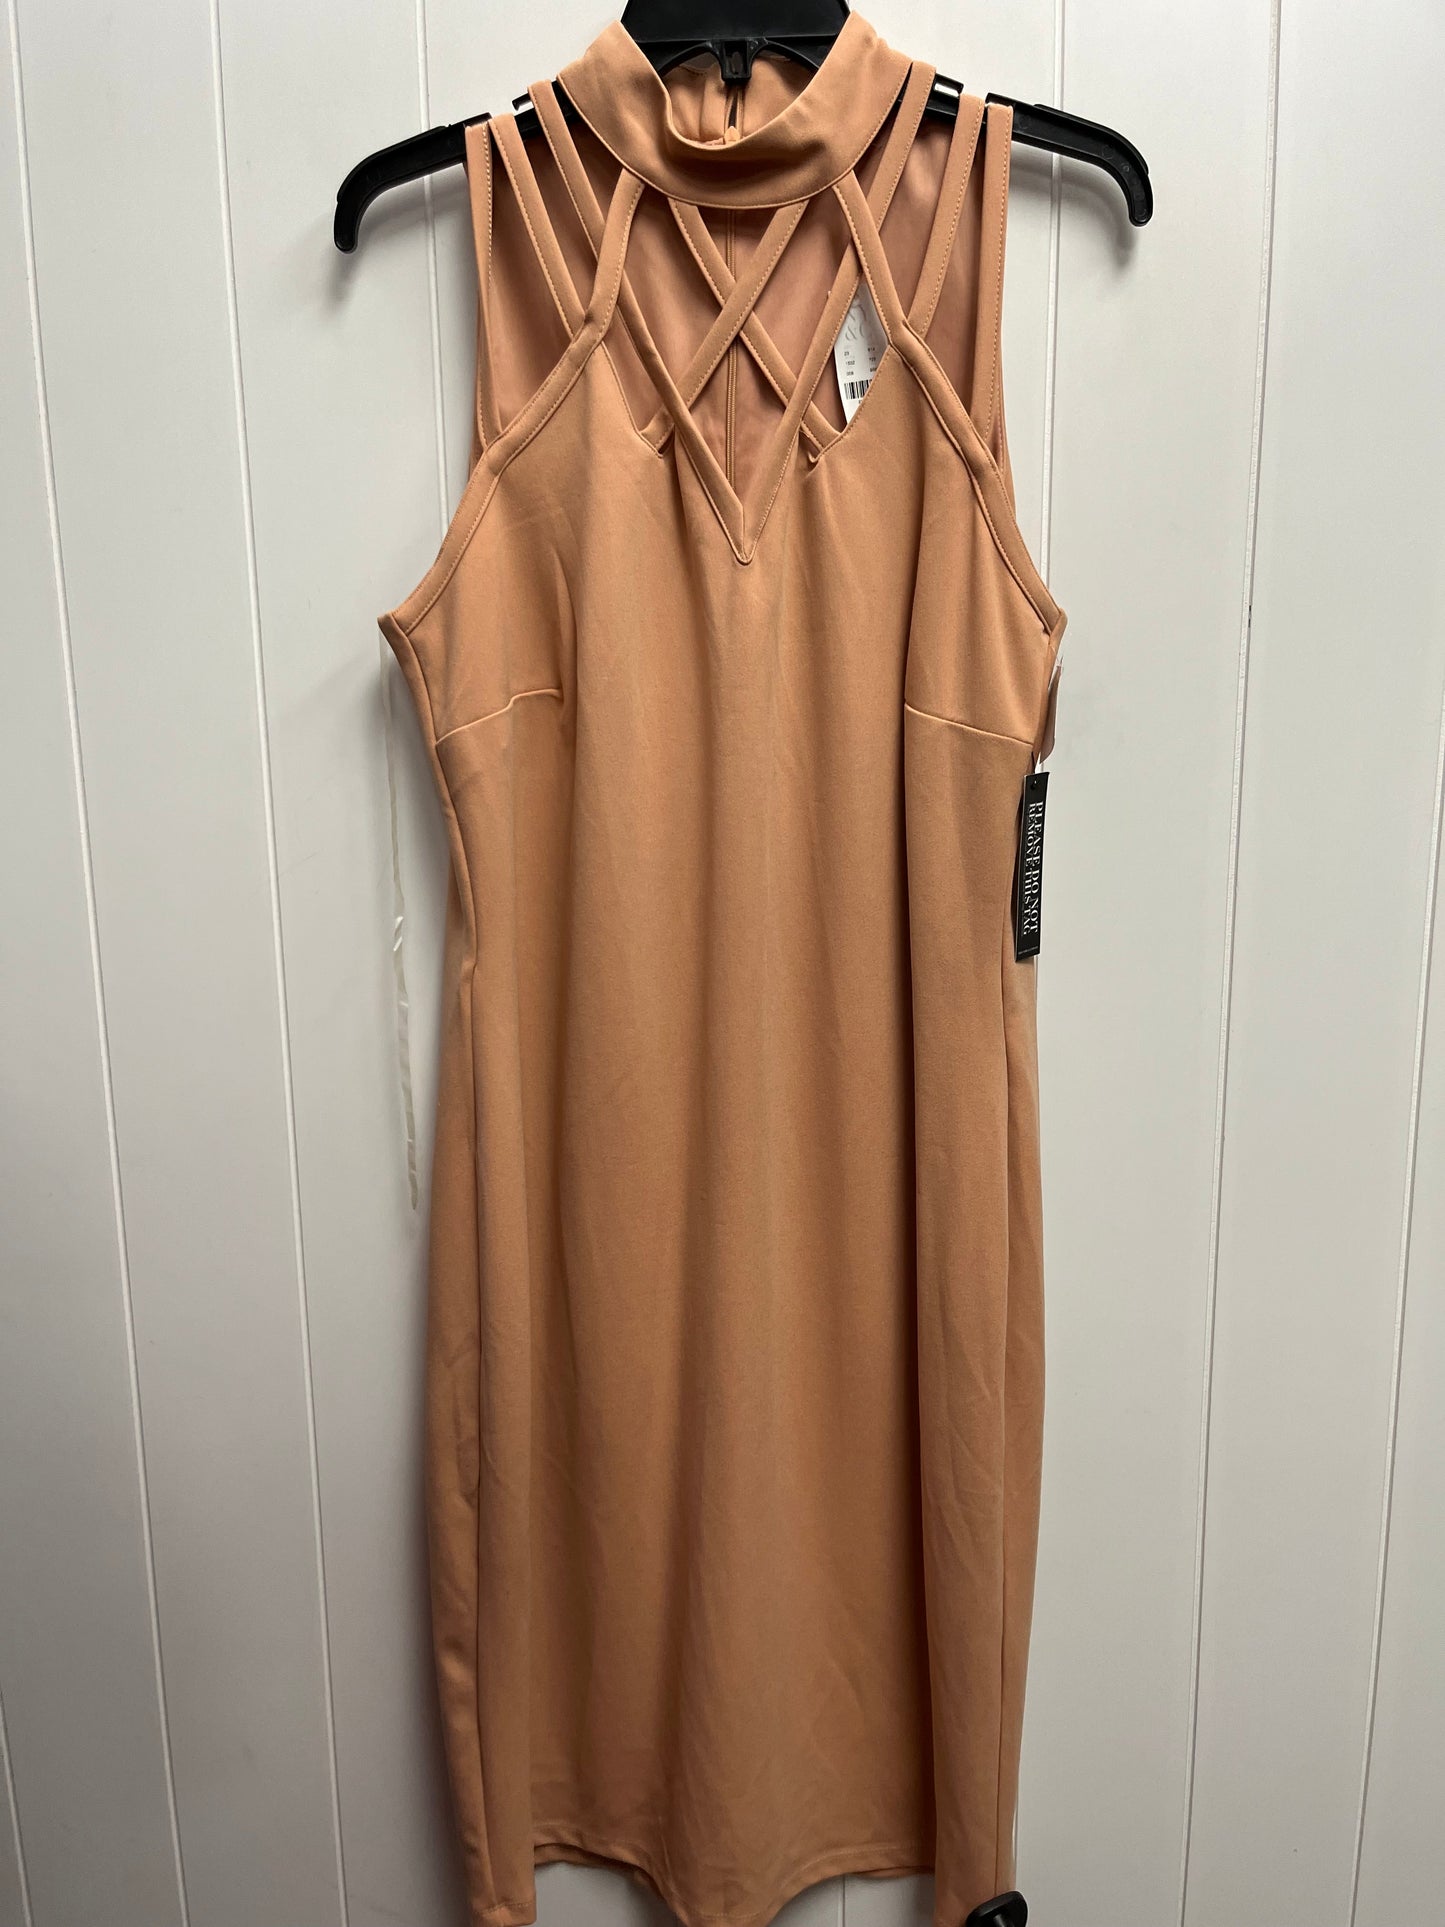 Peach Dress Work New York And Co, Size L